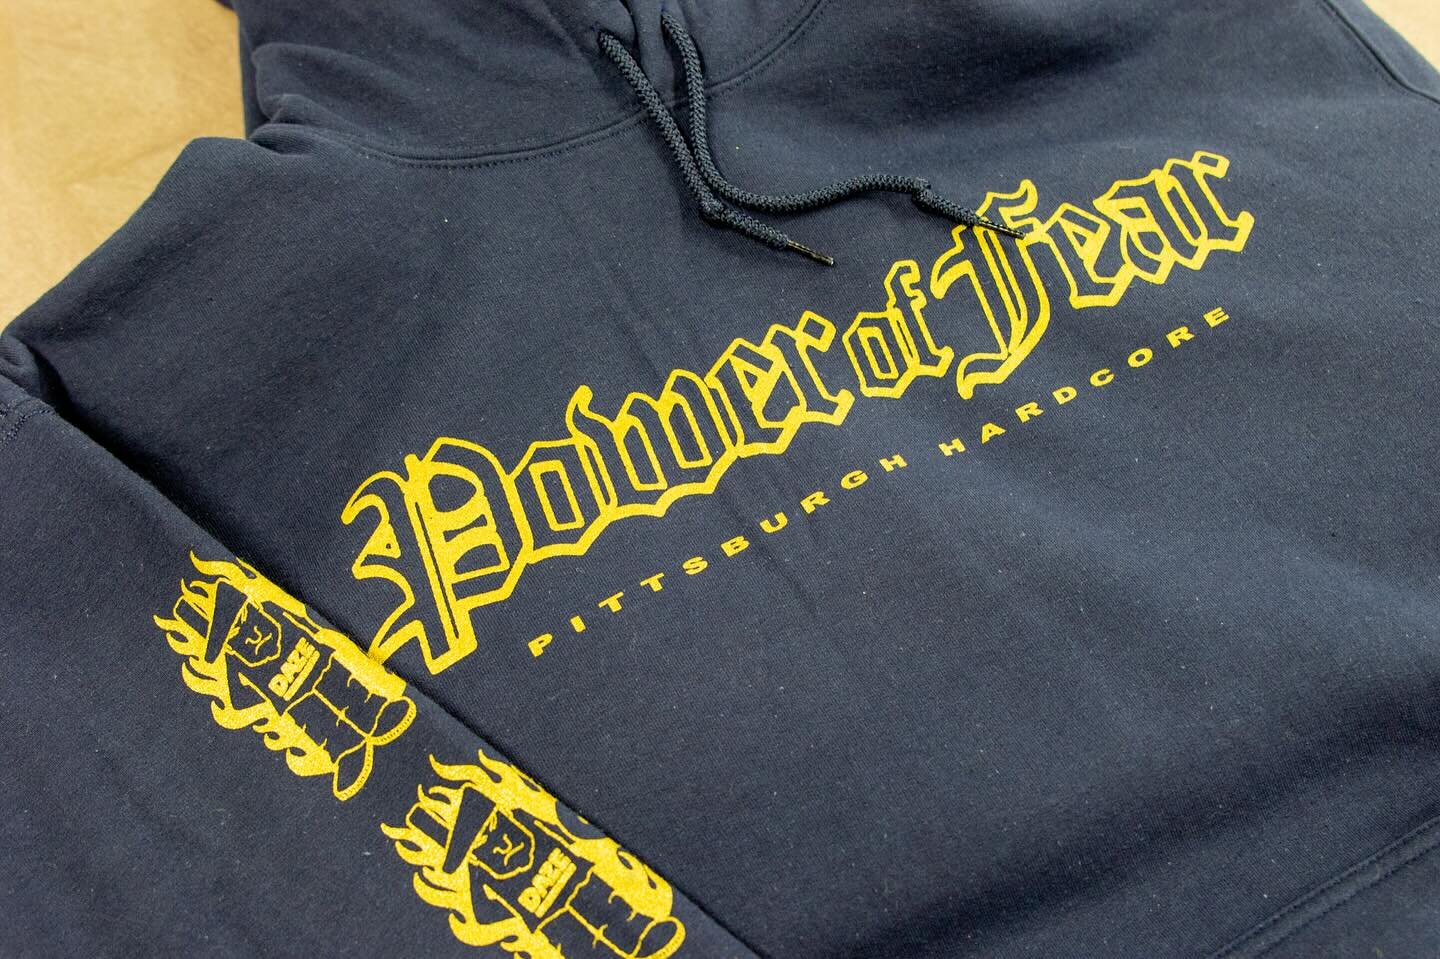 You can&rsquo;t go wrong with 24k gold ink. Thank you @poweroffearpahc! www.mlscreenprinting.com